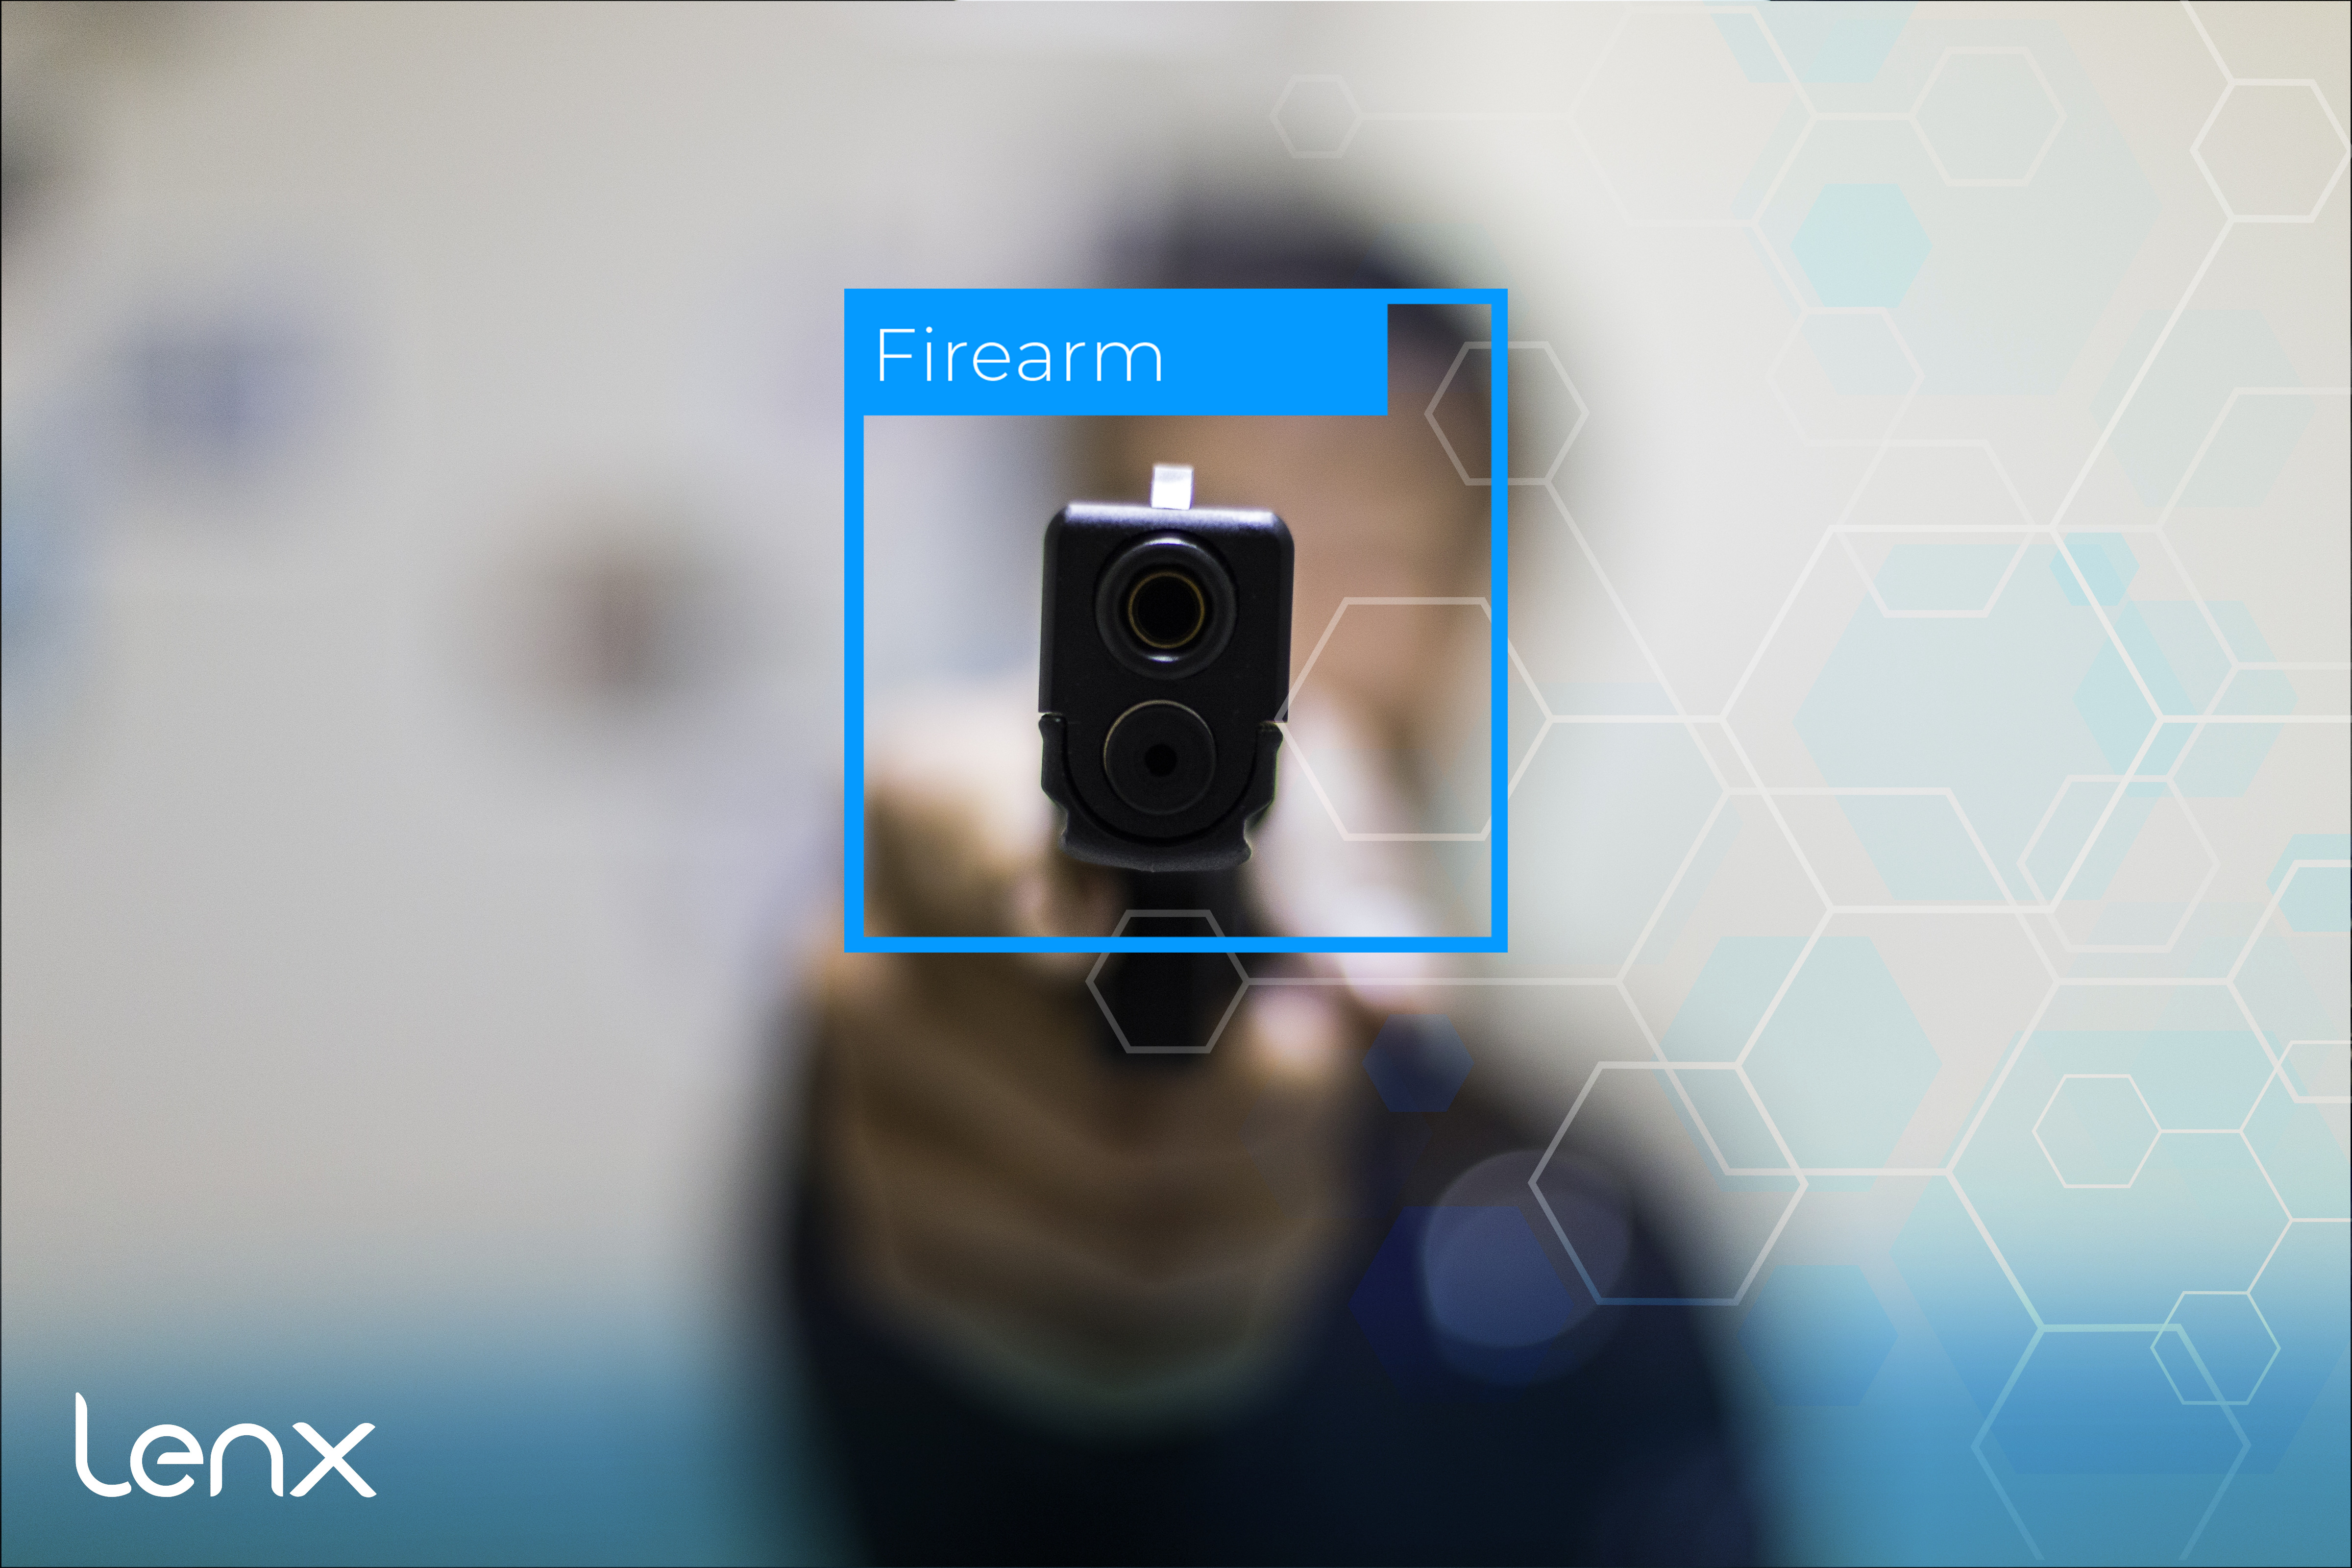 Preventing Loss Of Life With Gun Detection And AI Security Systems